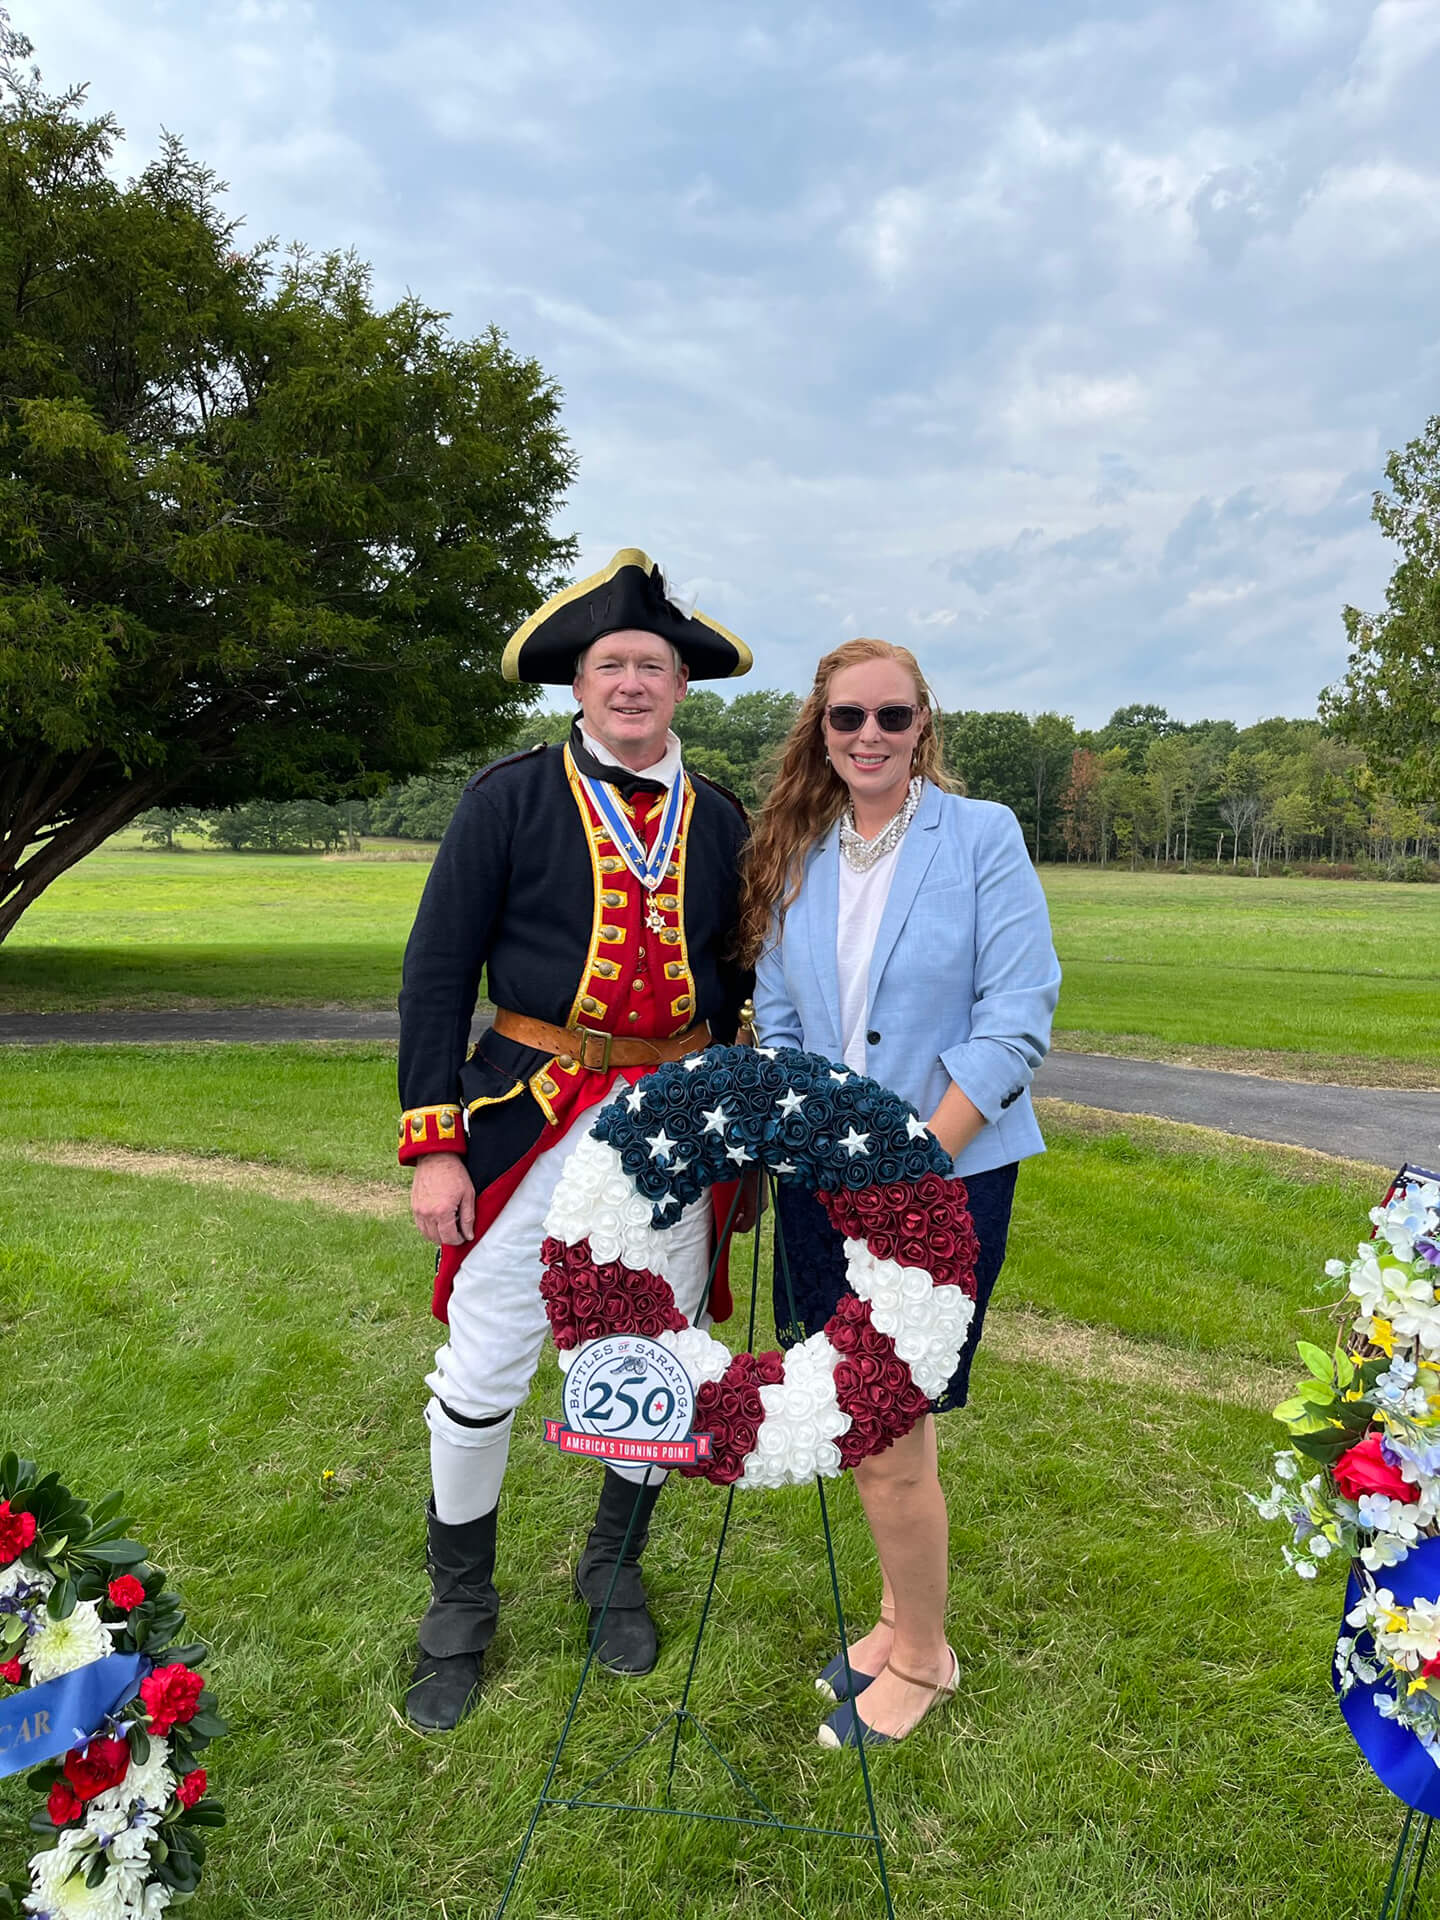 A man and woman standing behind a wreath stand decorated like the American flag